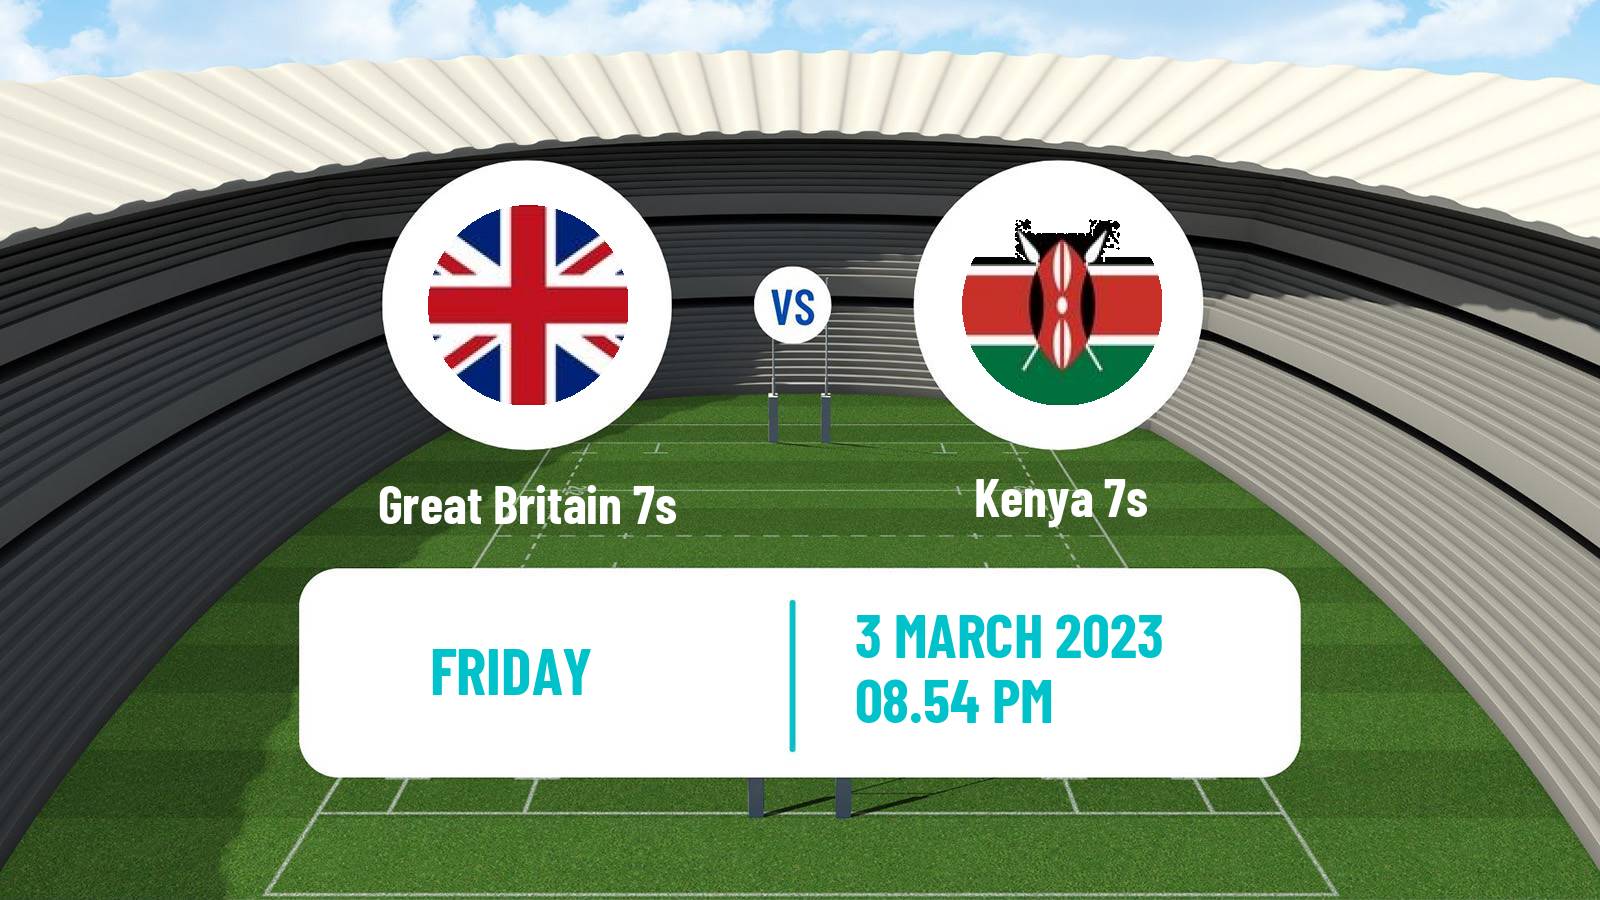 Rugby union Sevens World Series - Canada Great Britain 7s - Kenya 7s